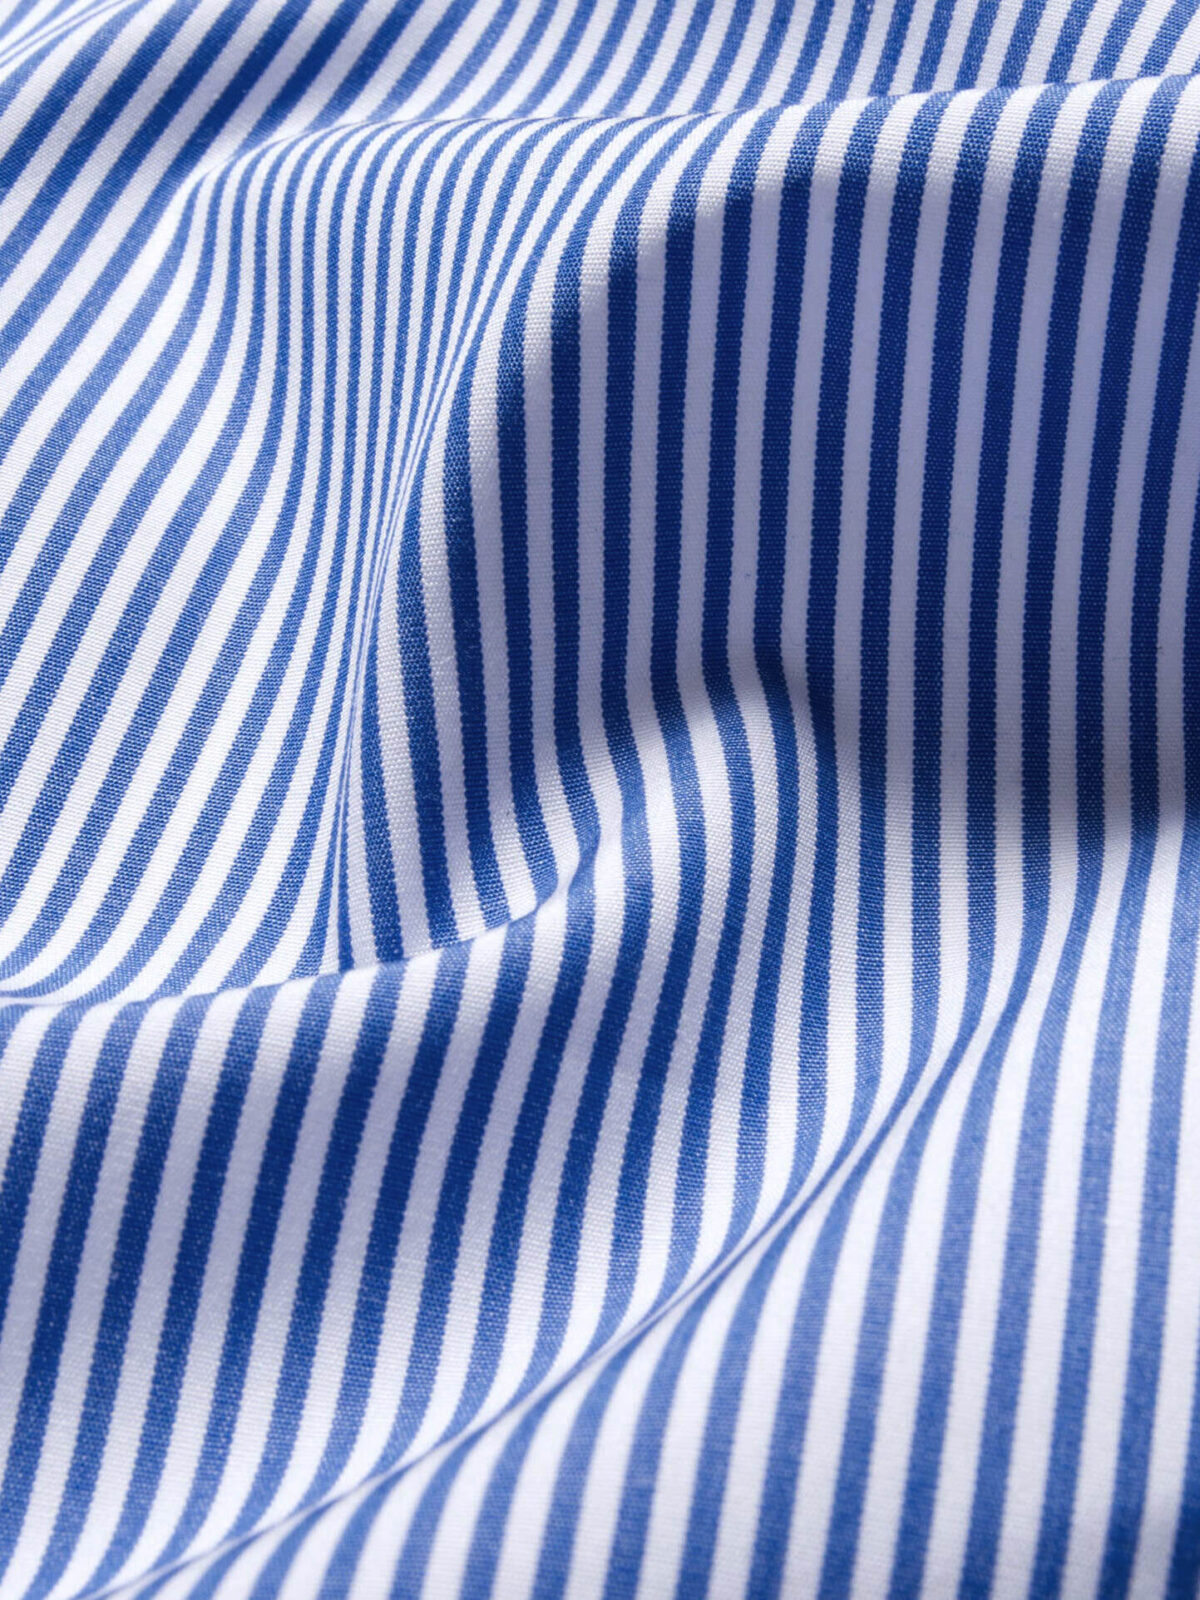 100% Cotton Royal Blue and White Stripe Fabric